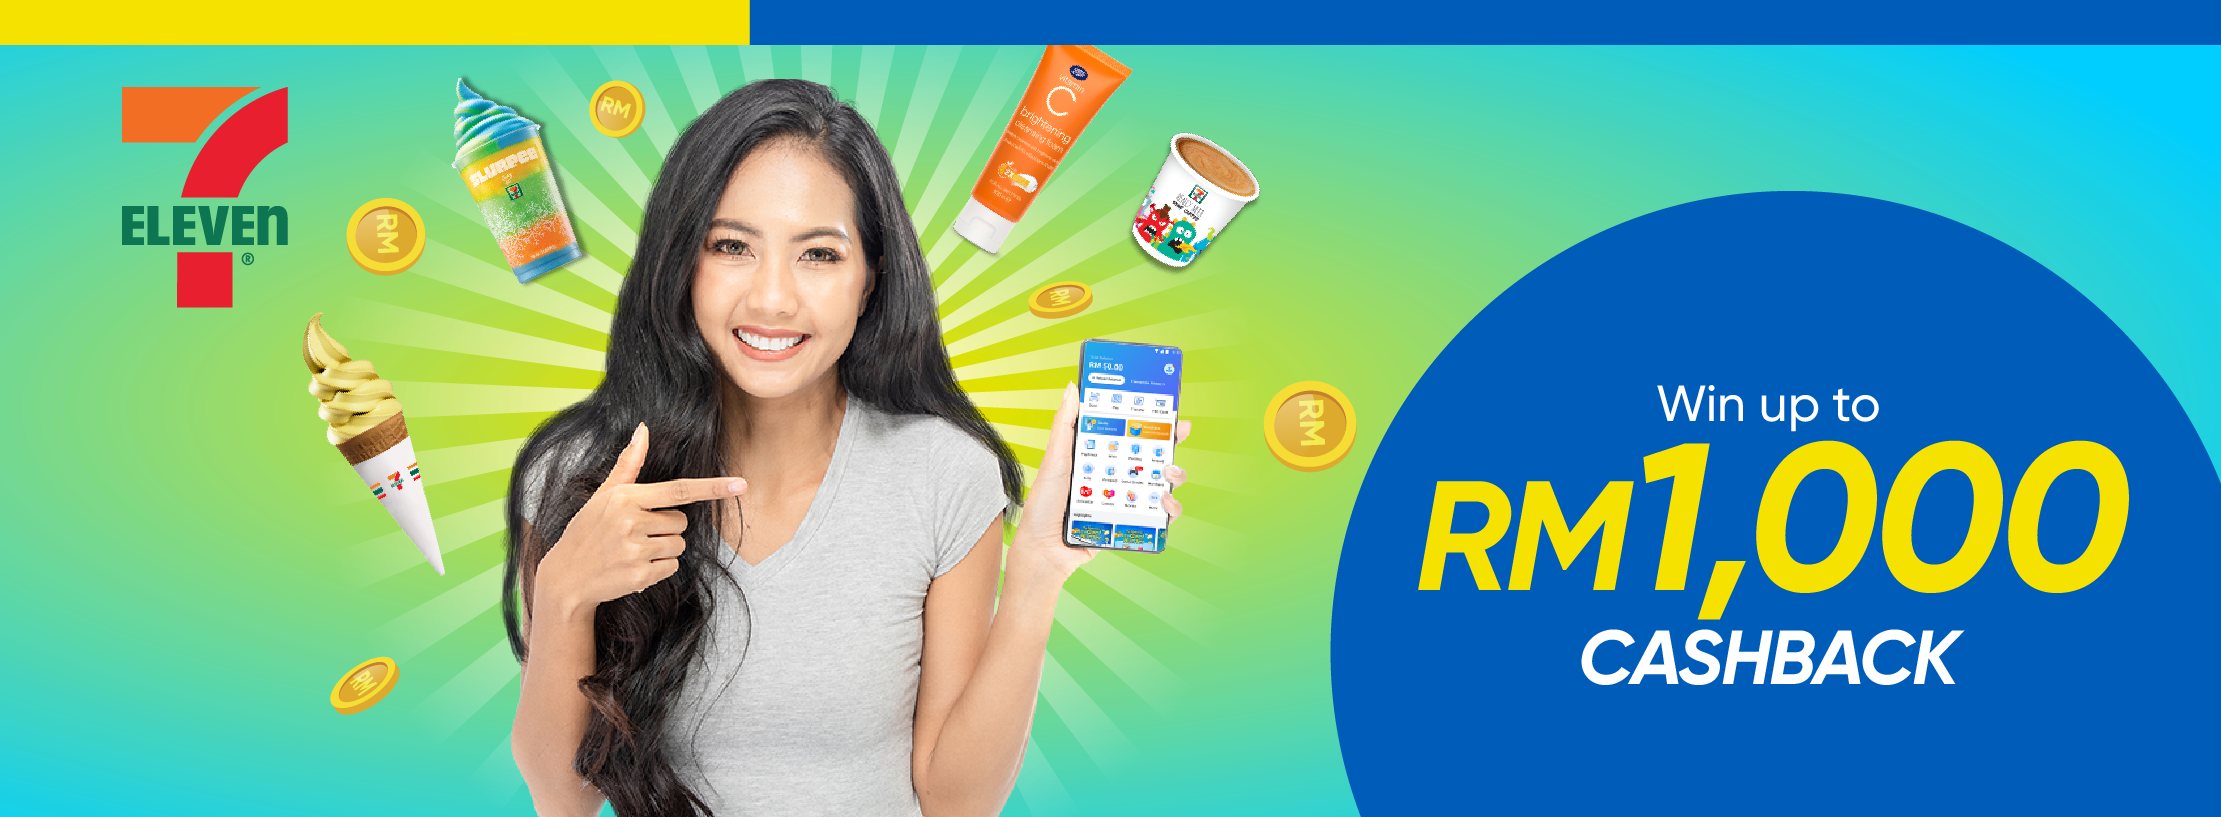 7Eleven_RM1KCB_Web_Banner.png